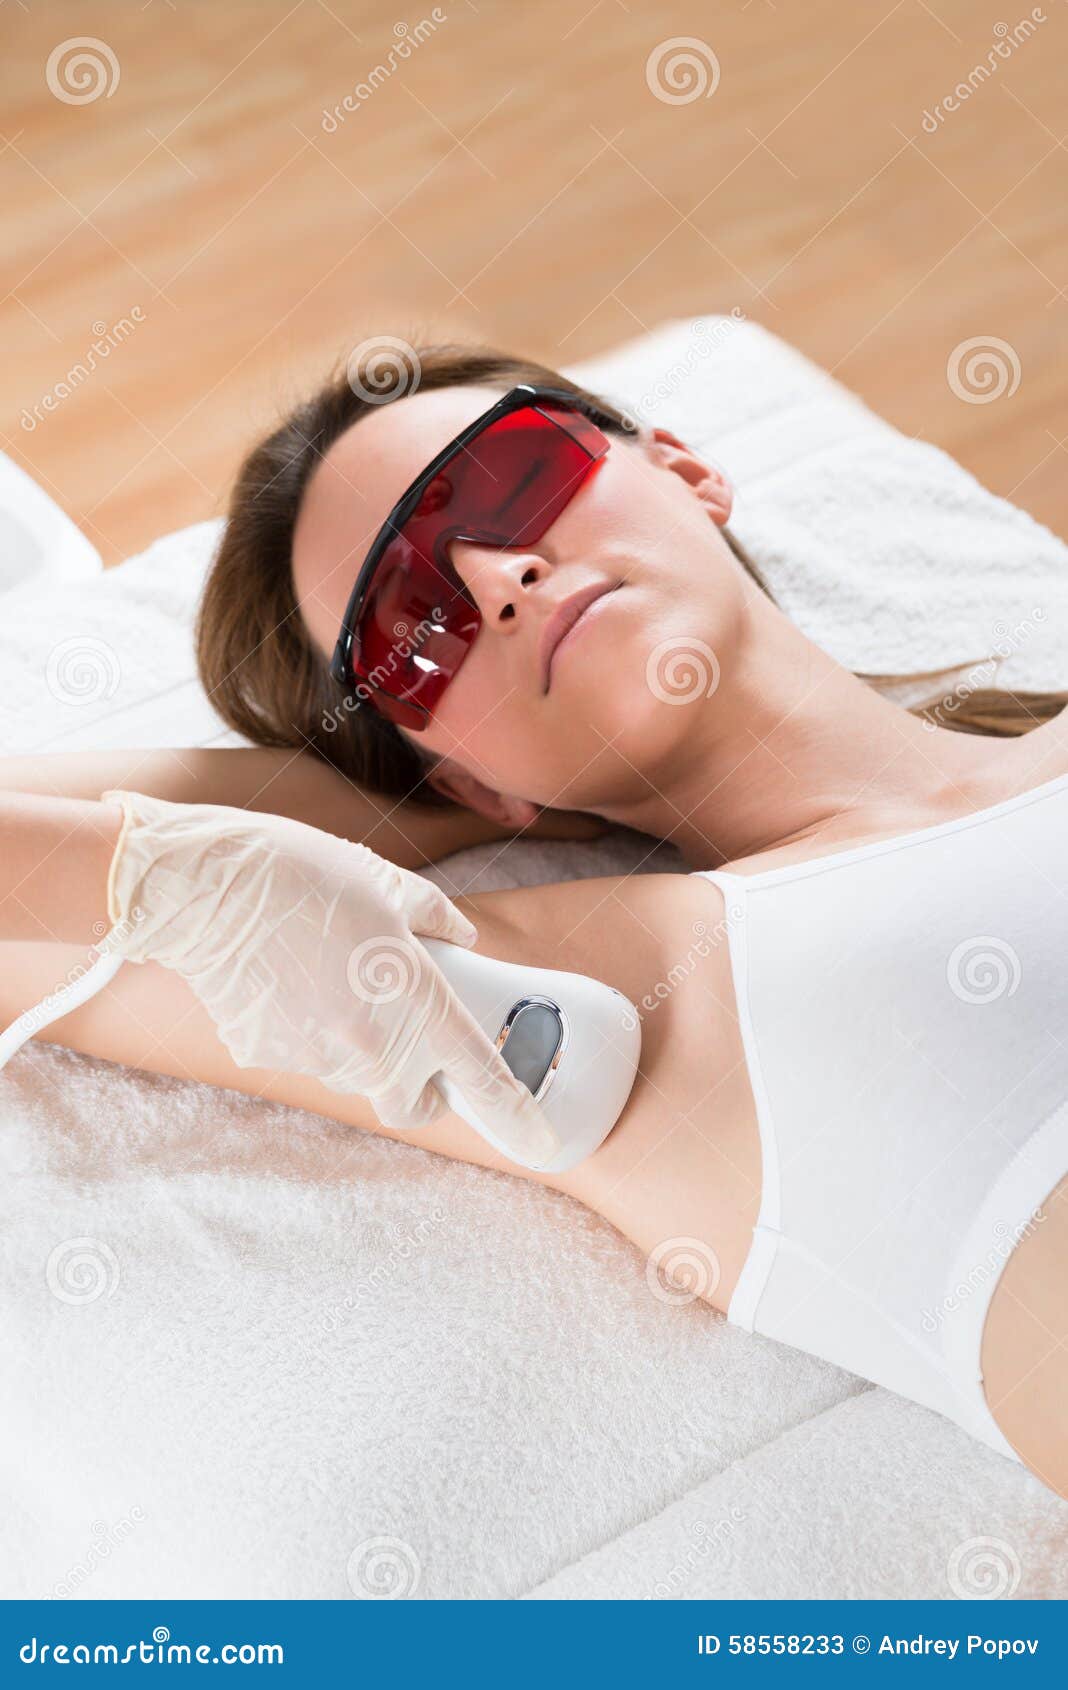 beautician removing hair of woman with epilator